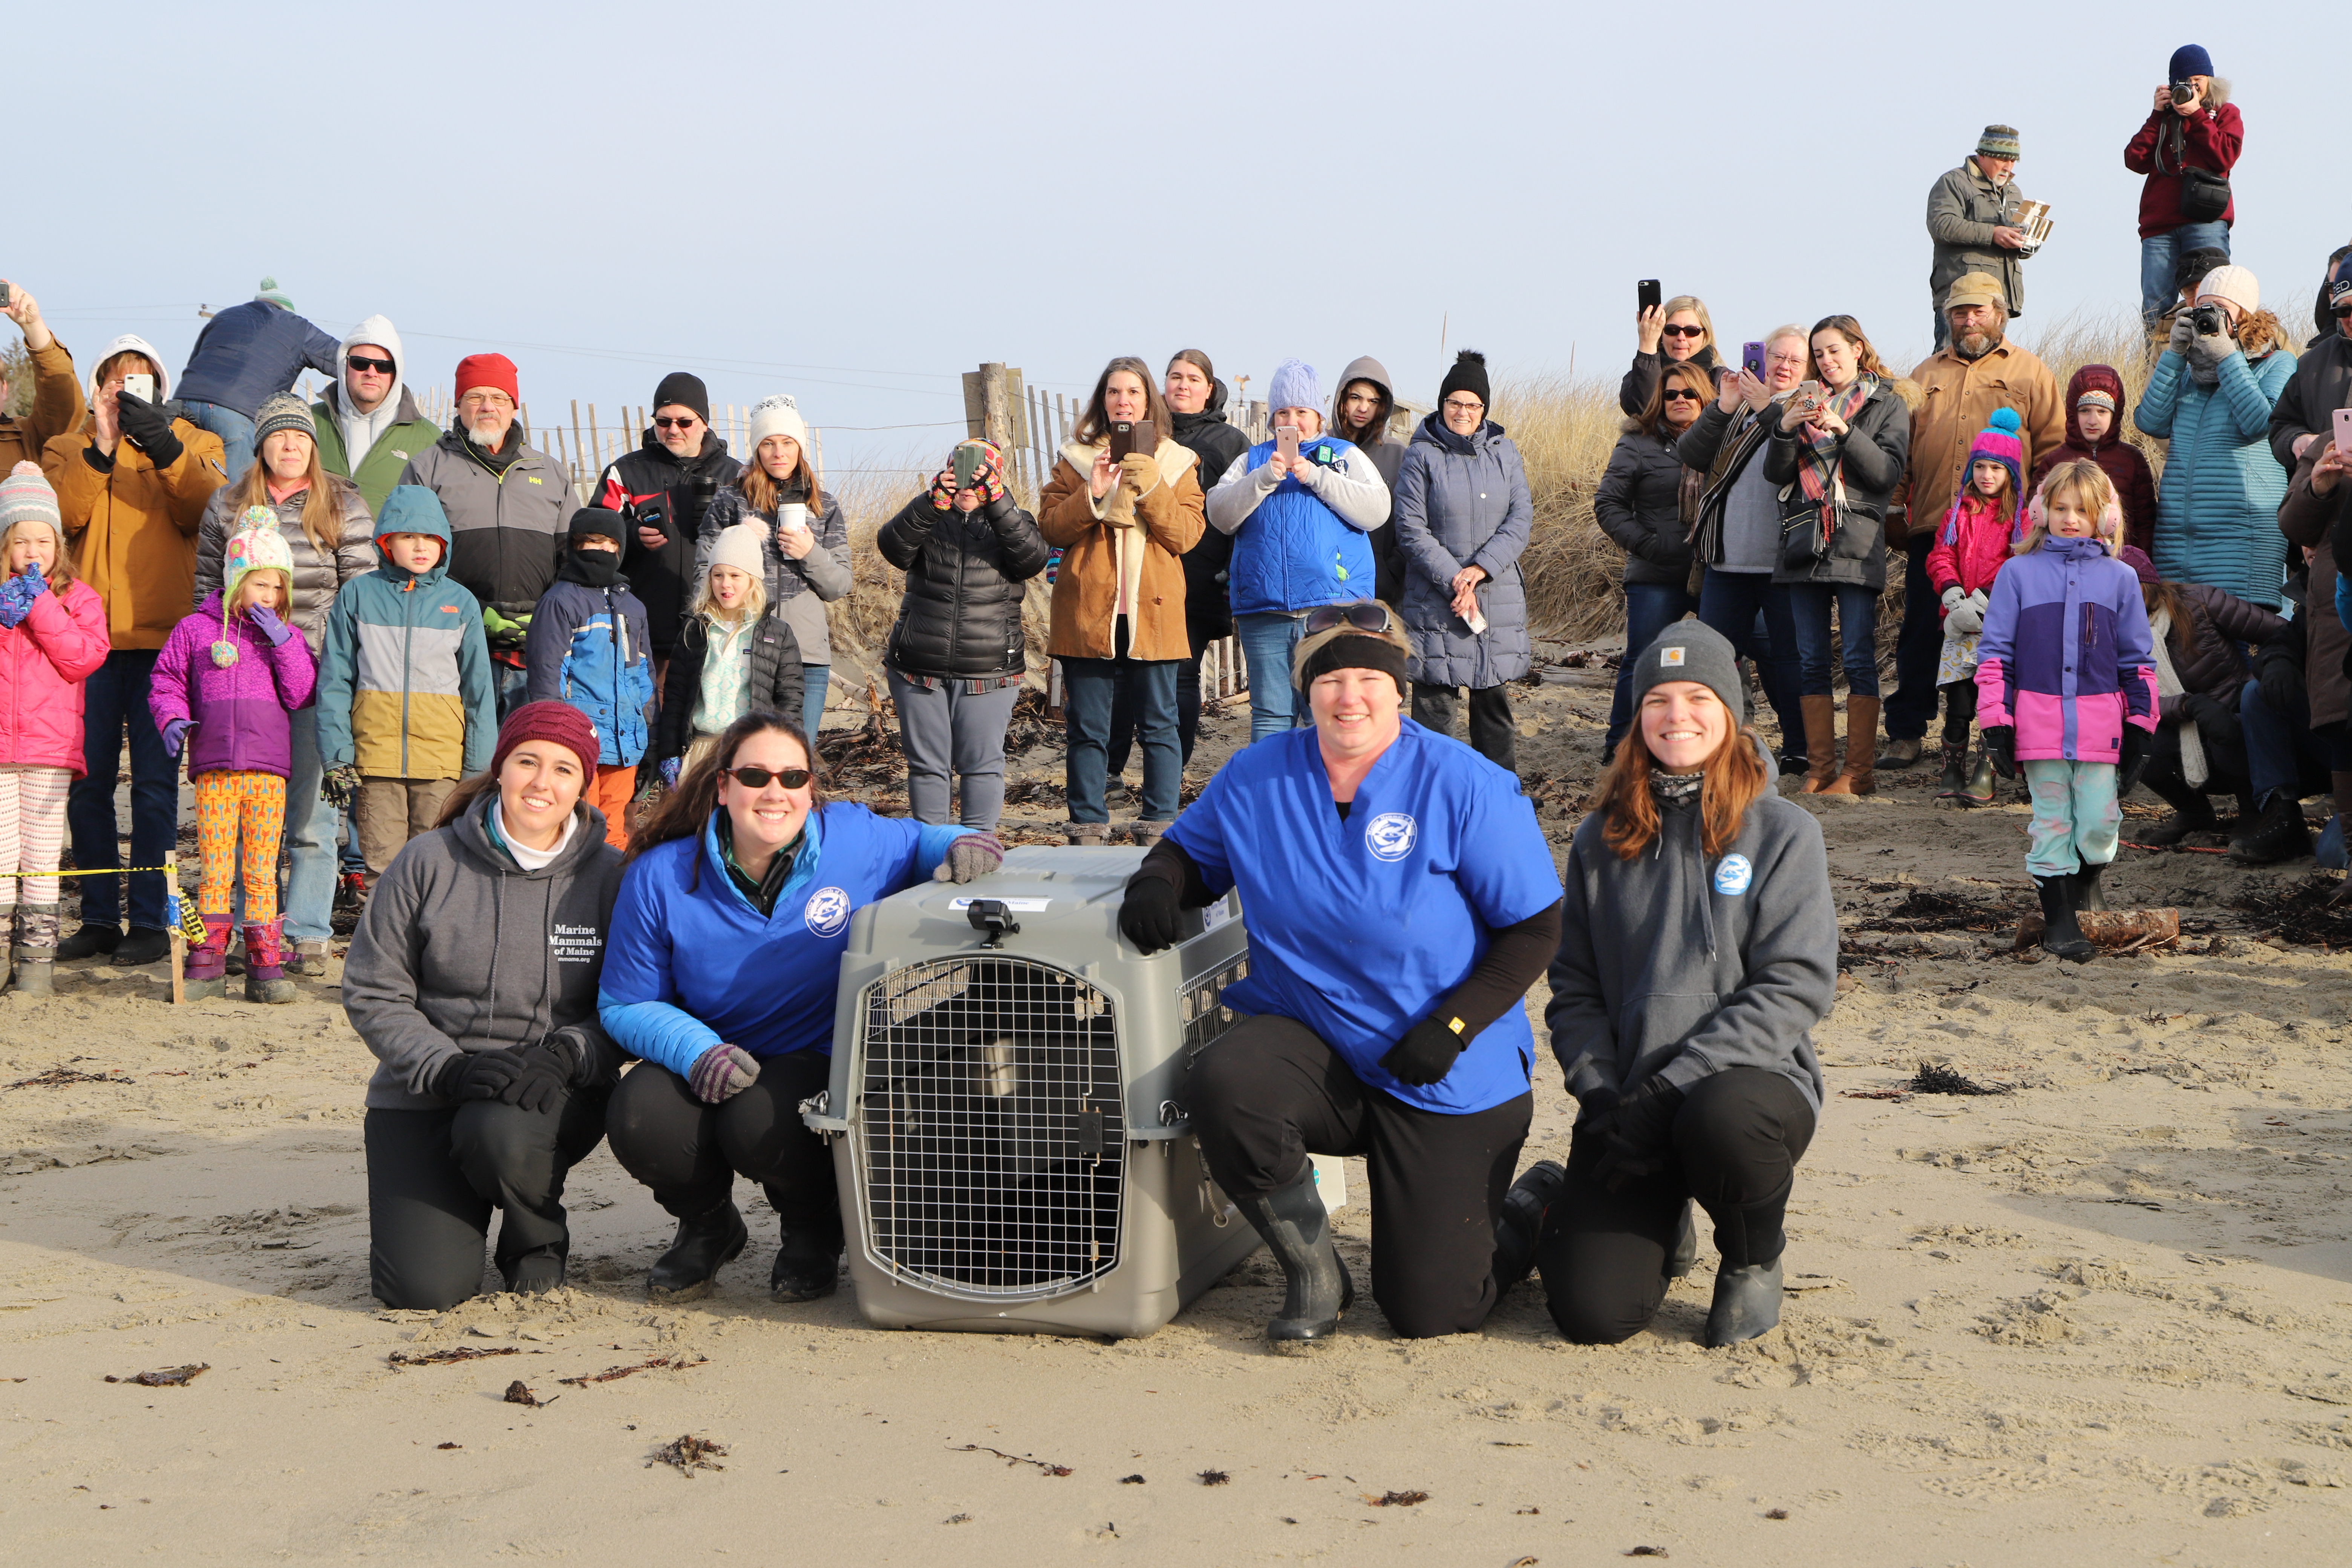 Responders crouch next to a kennel ahead of a seal release. Several onlookers are gathered in the background to watch the release.